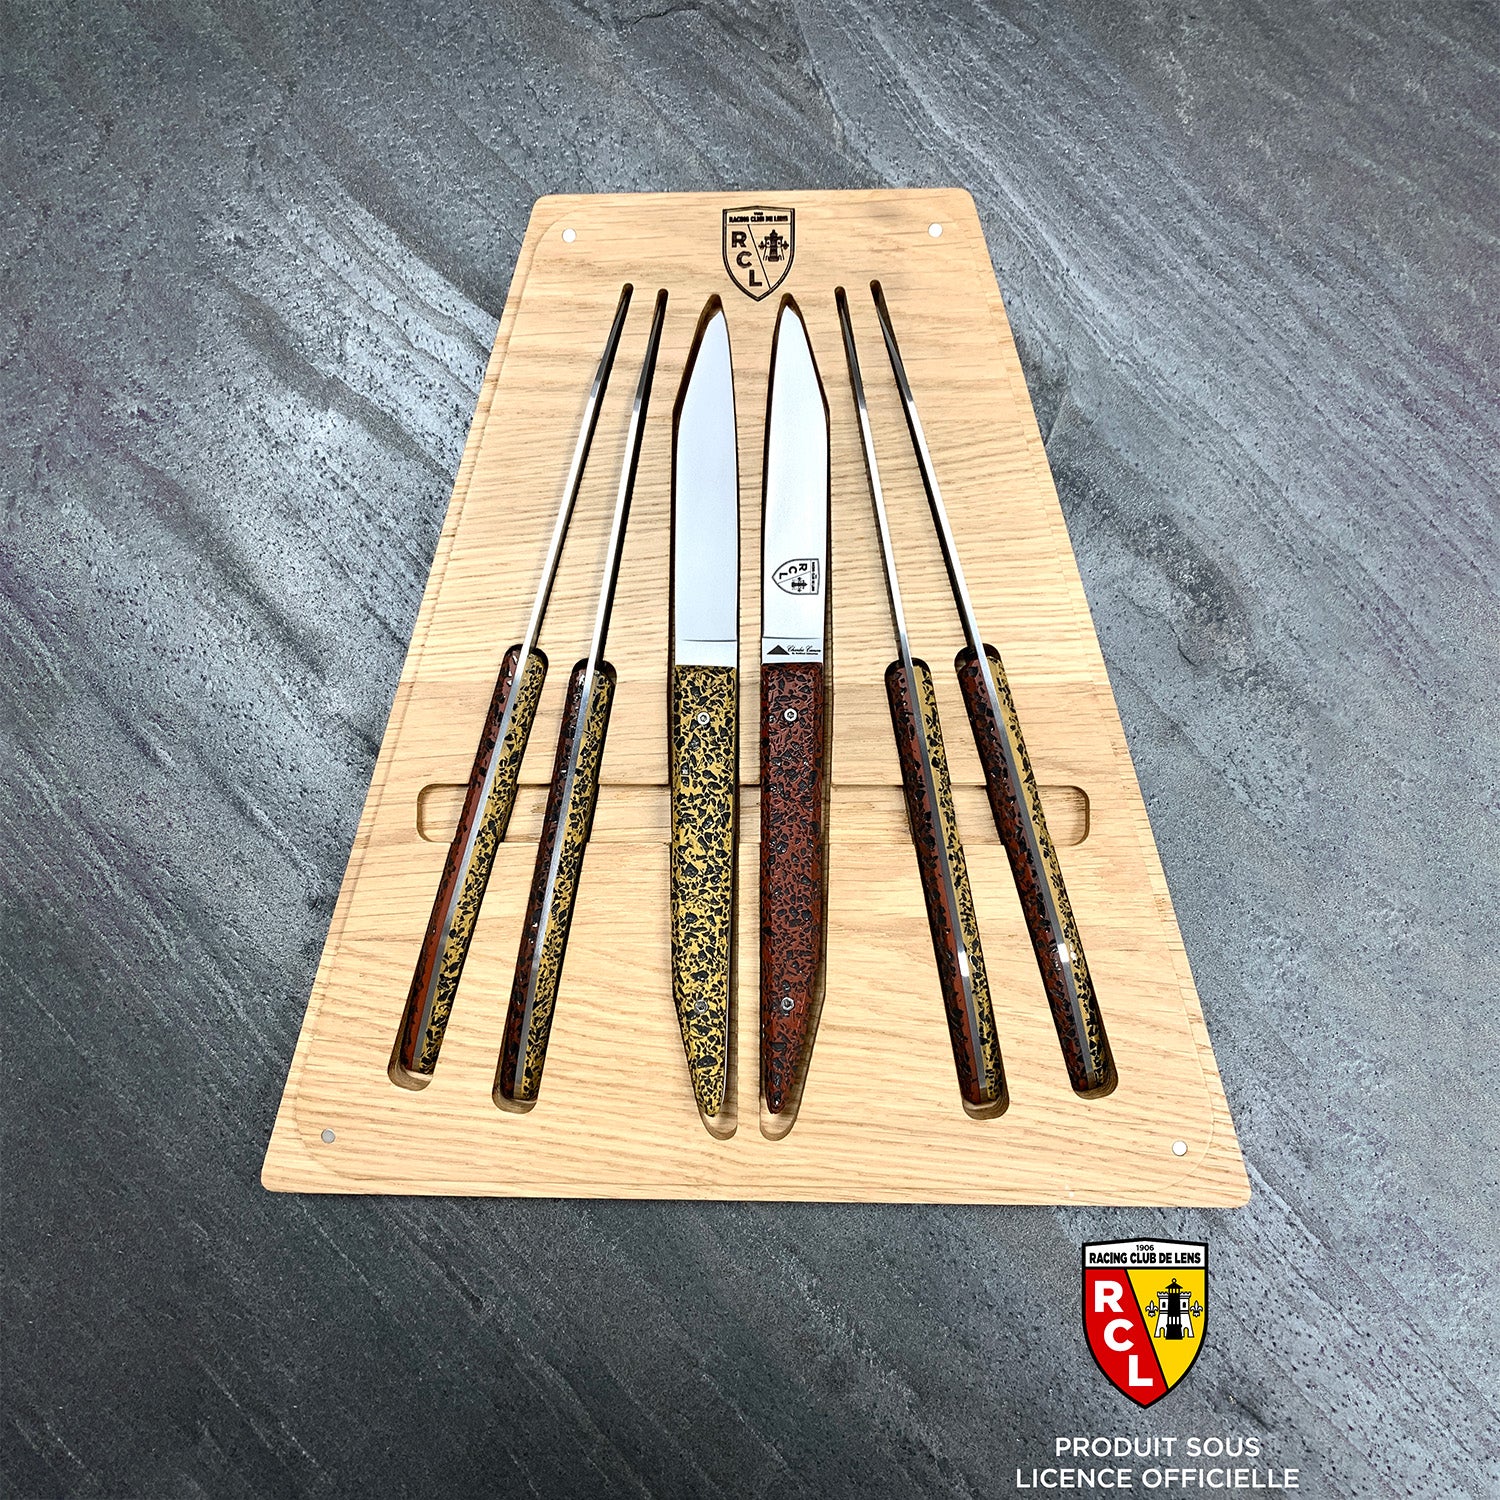 Box of 6 blood and gold edition table knives (UNDER OFFICIAL LICENSE)